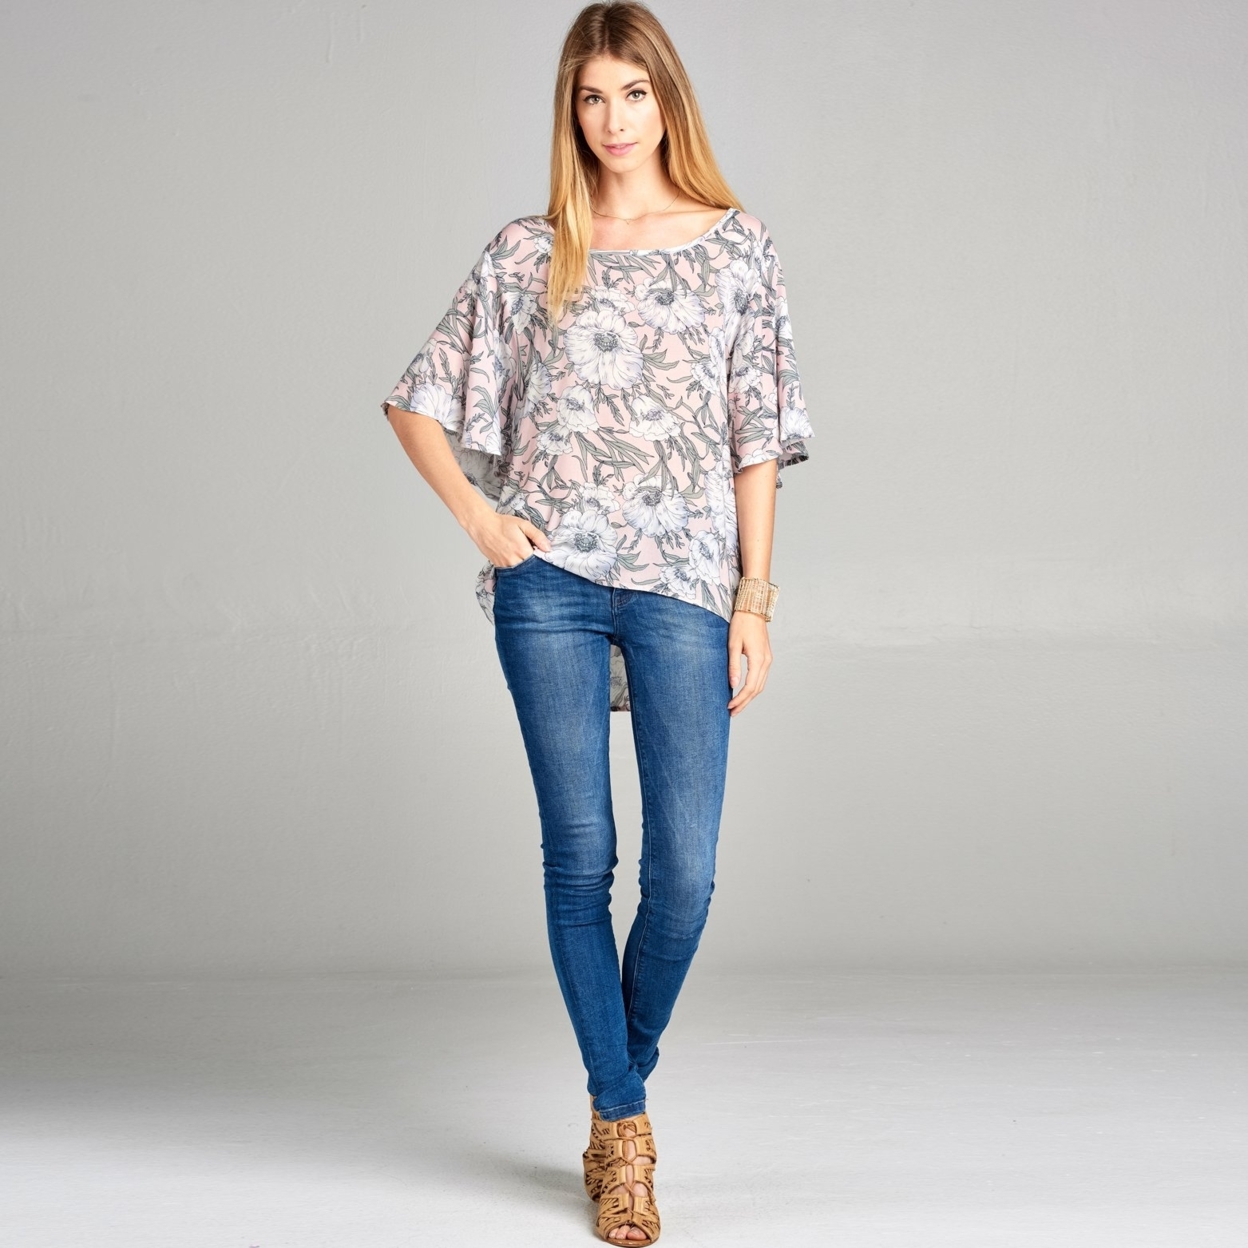 Butterfly Sleeve Floral Top - Dusty Pink, Medium (8-10)